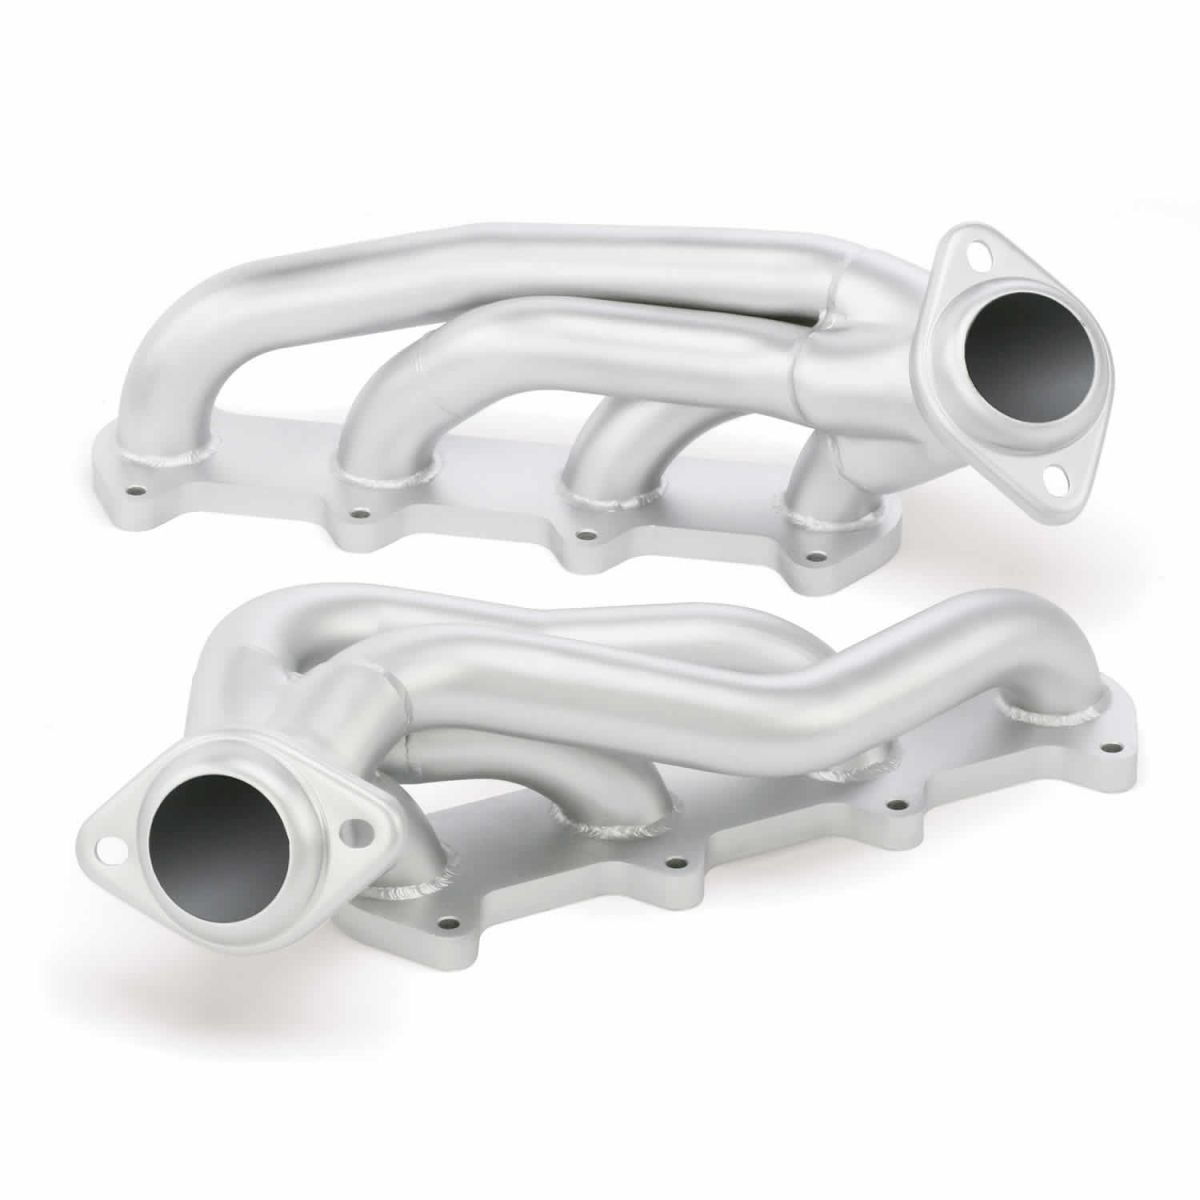 Banks Power - Banks Power Torque Tube Exhaust Header System For 04-08 Ford 5.4L F-150 and Lincoln Mark LT